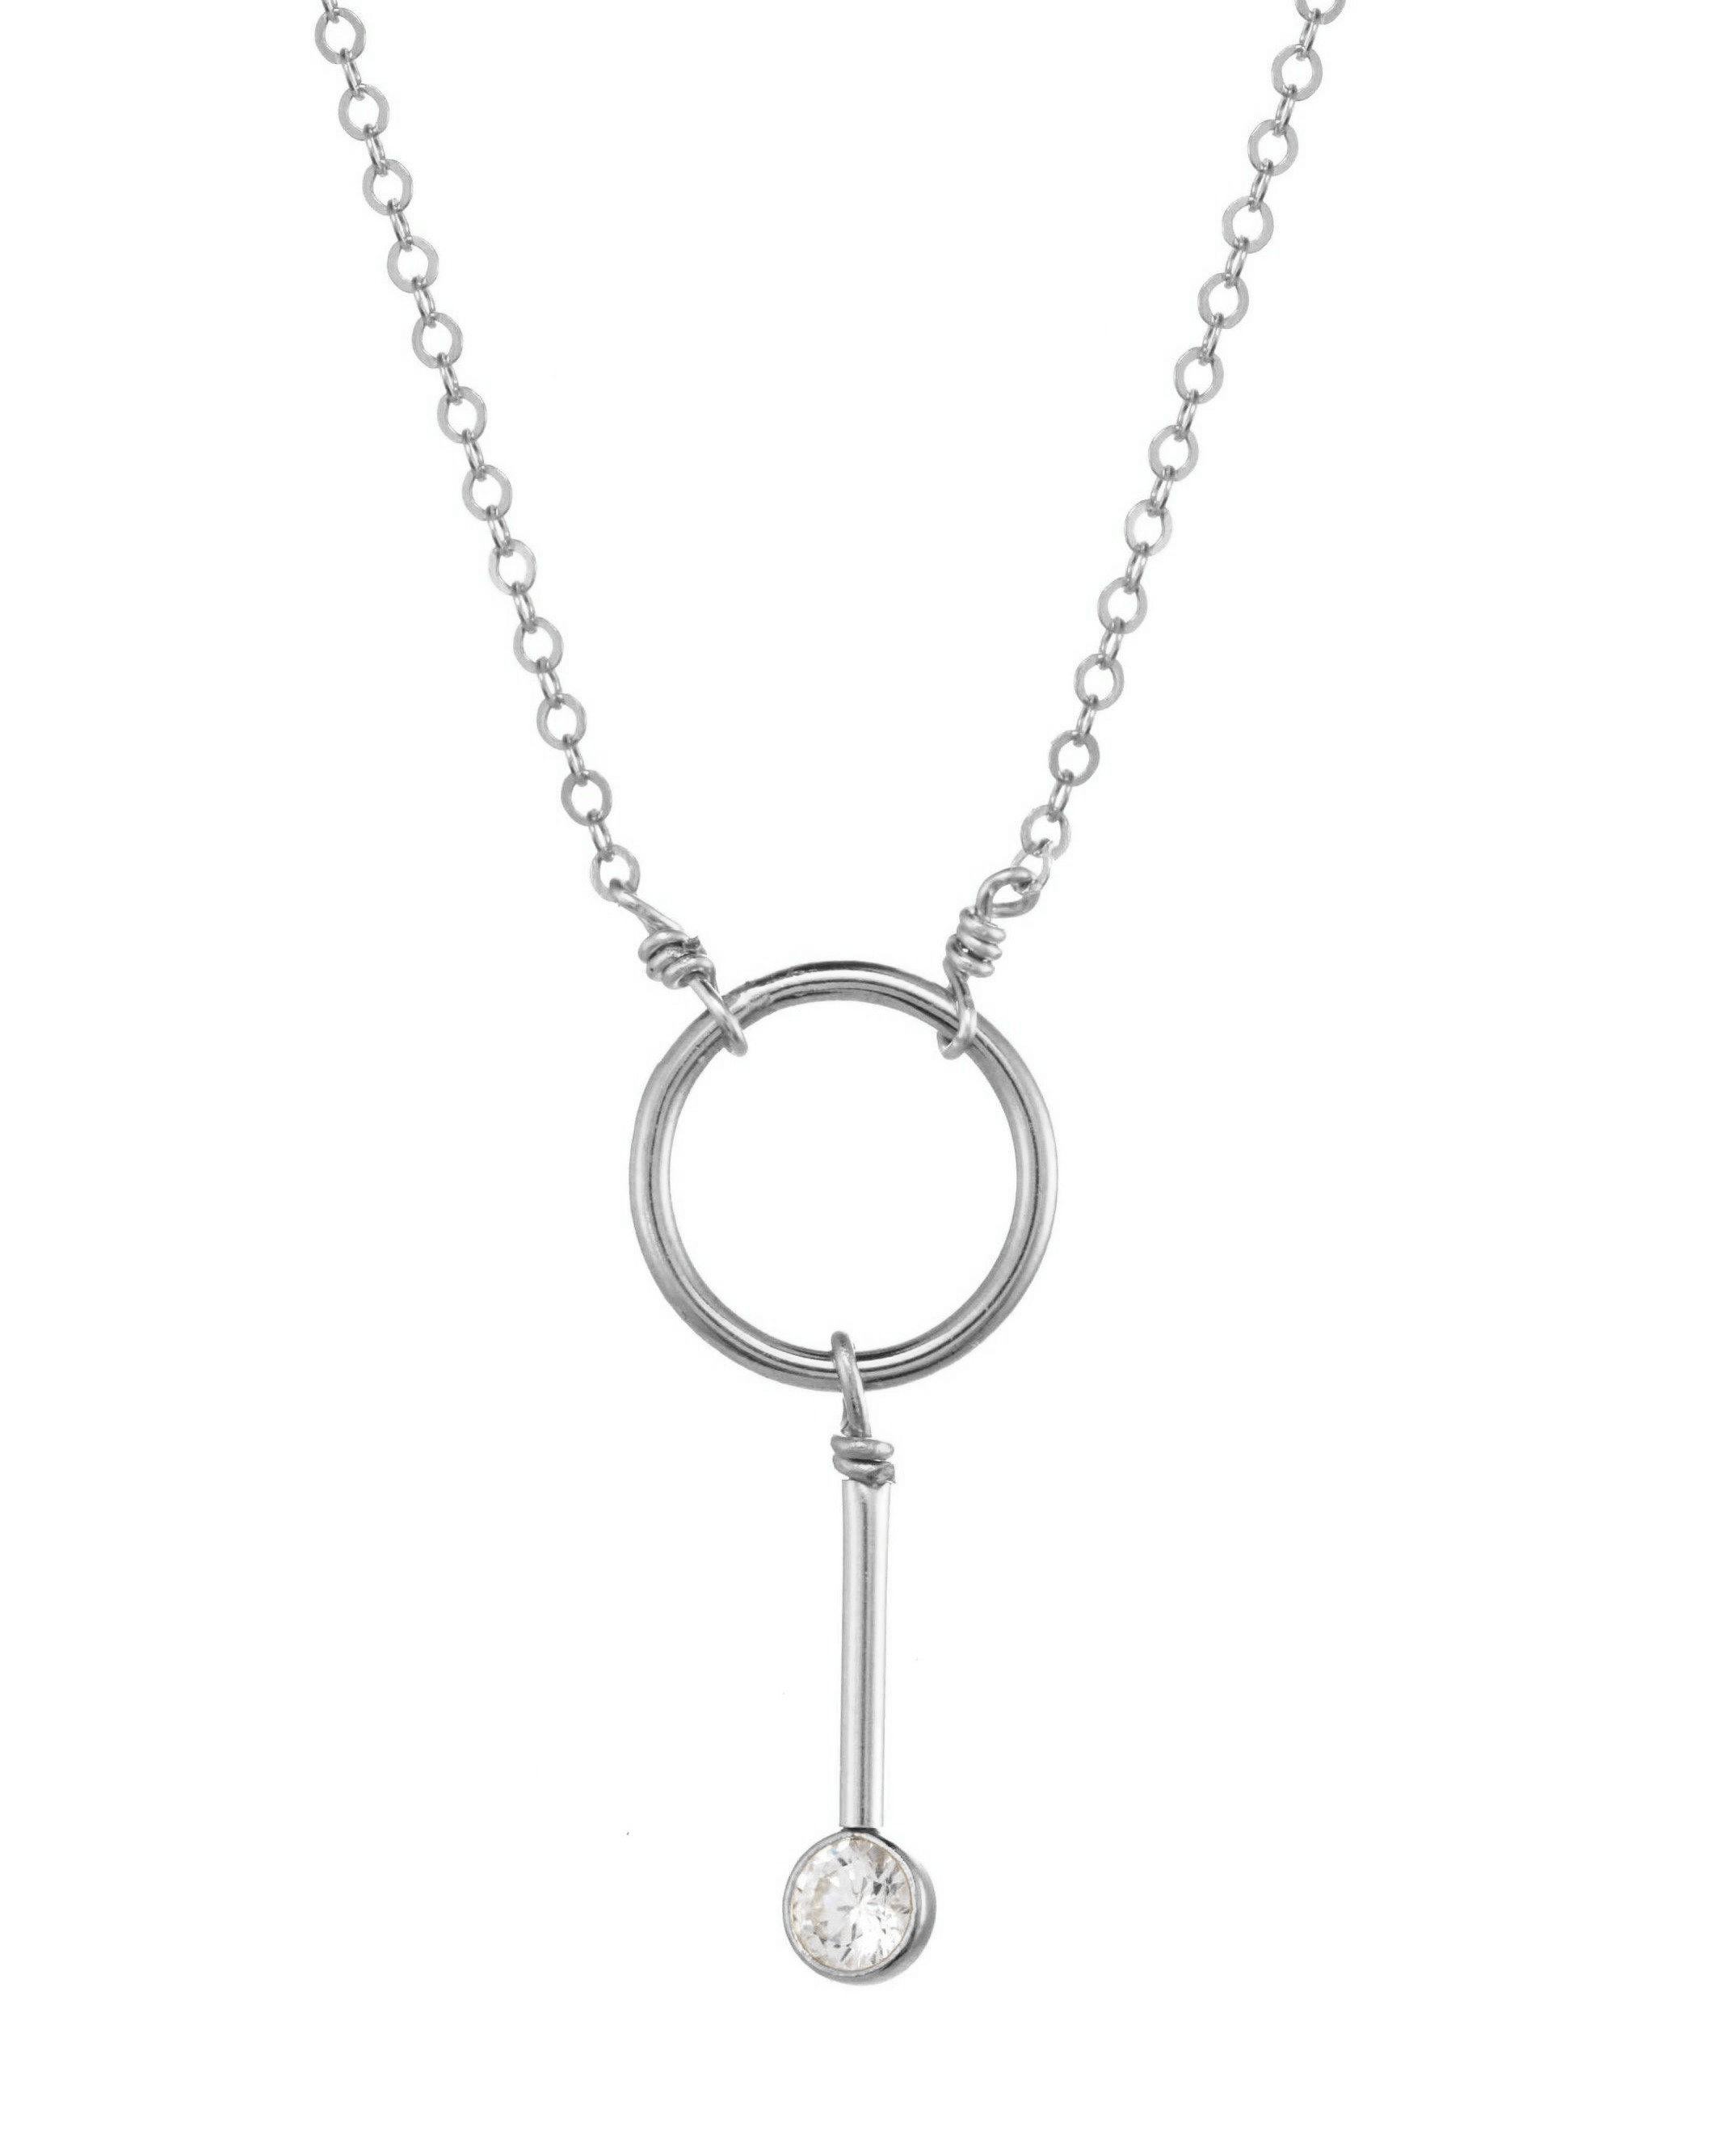 Luxe Necklace by KOZAKH. A 16 to 18 inch adjustable length necklace, crafted in Sterling Silver, featuring a ring wire and a 3mm Cubic Zirconia drop.